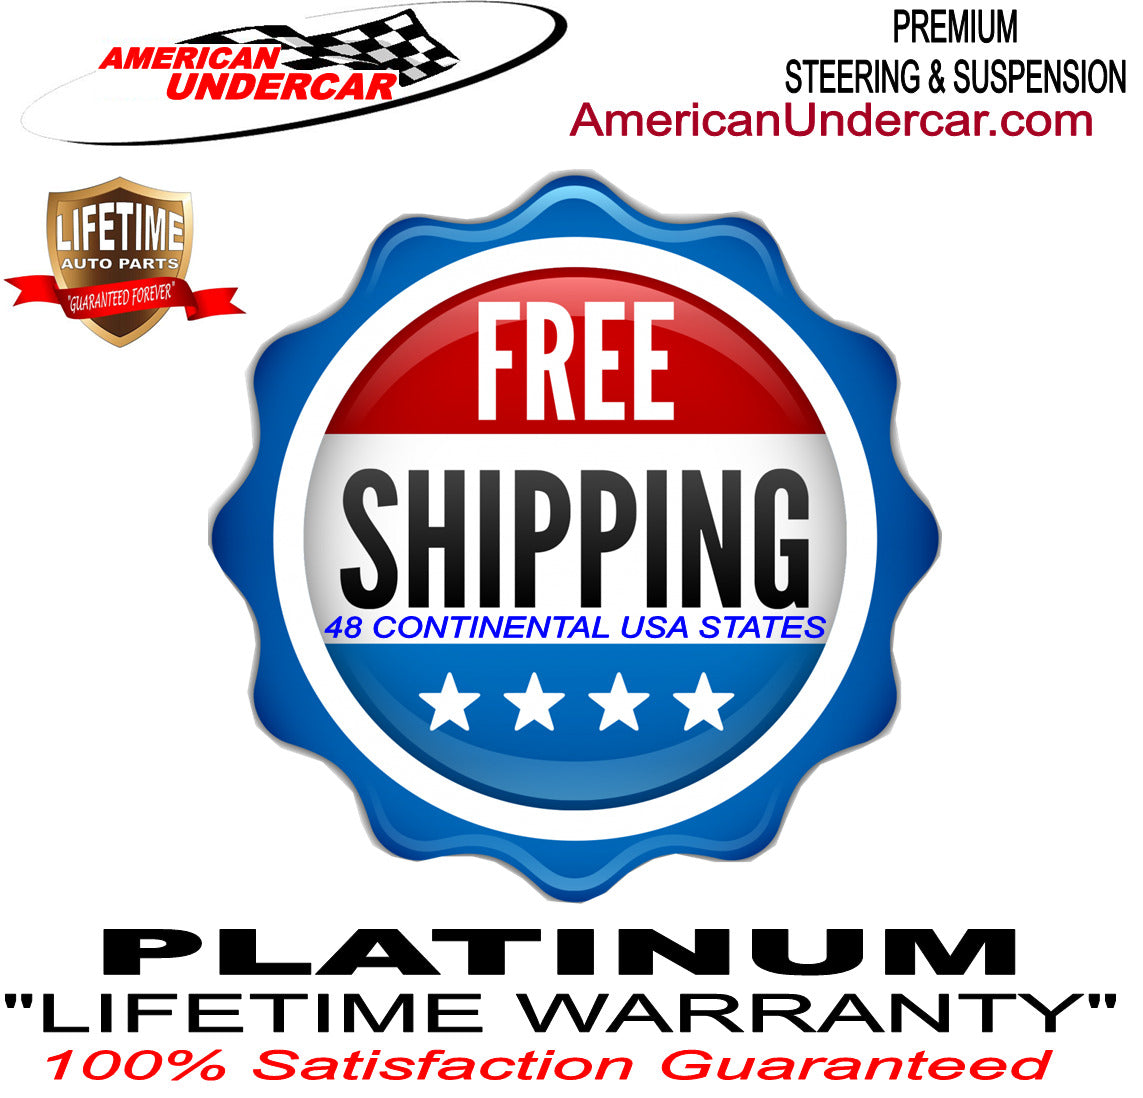 Lifetime Steering and Suspension Kit for 2001-2010 Chevrolet Silverado 2500HD 2WD